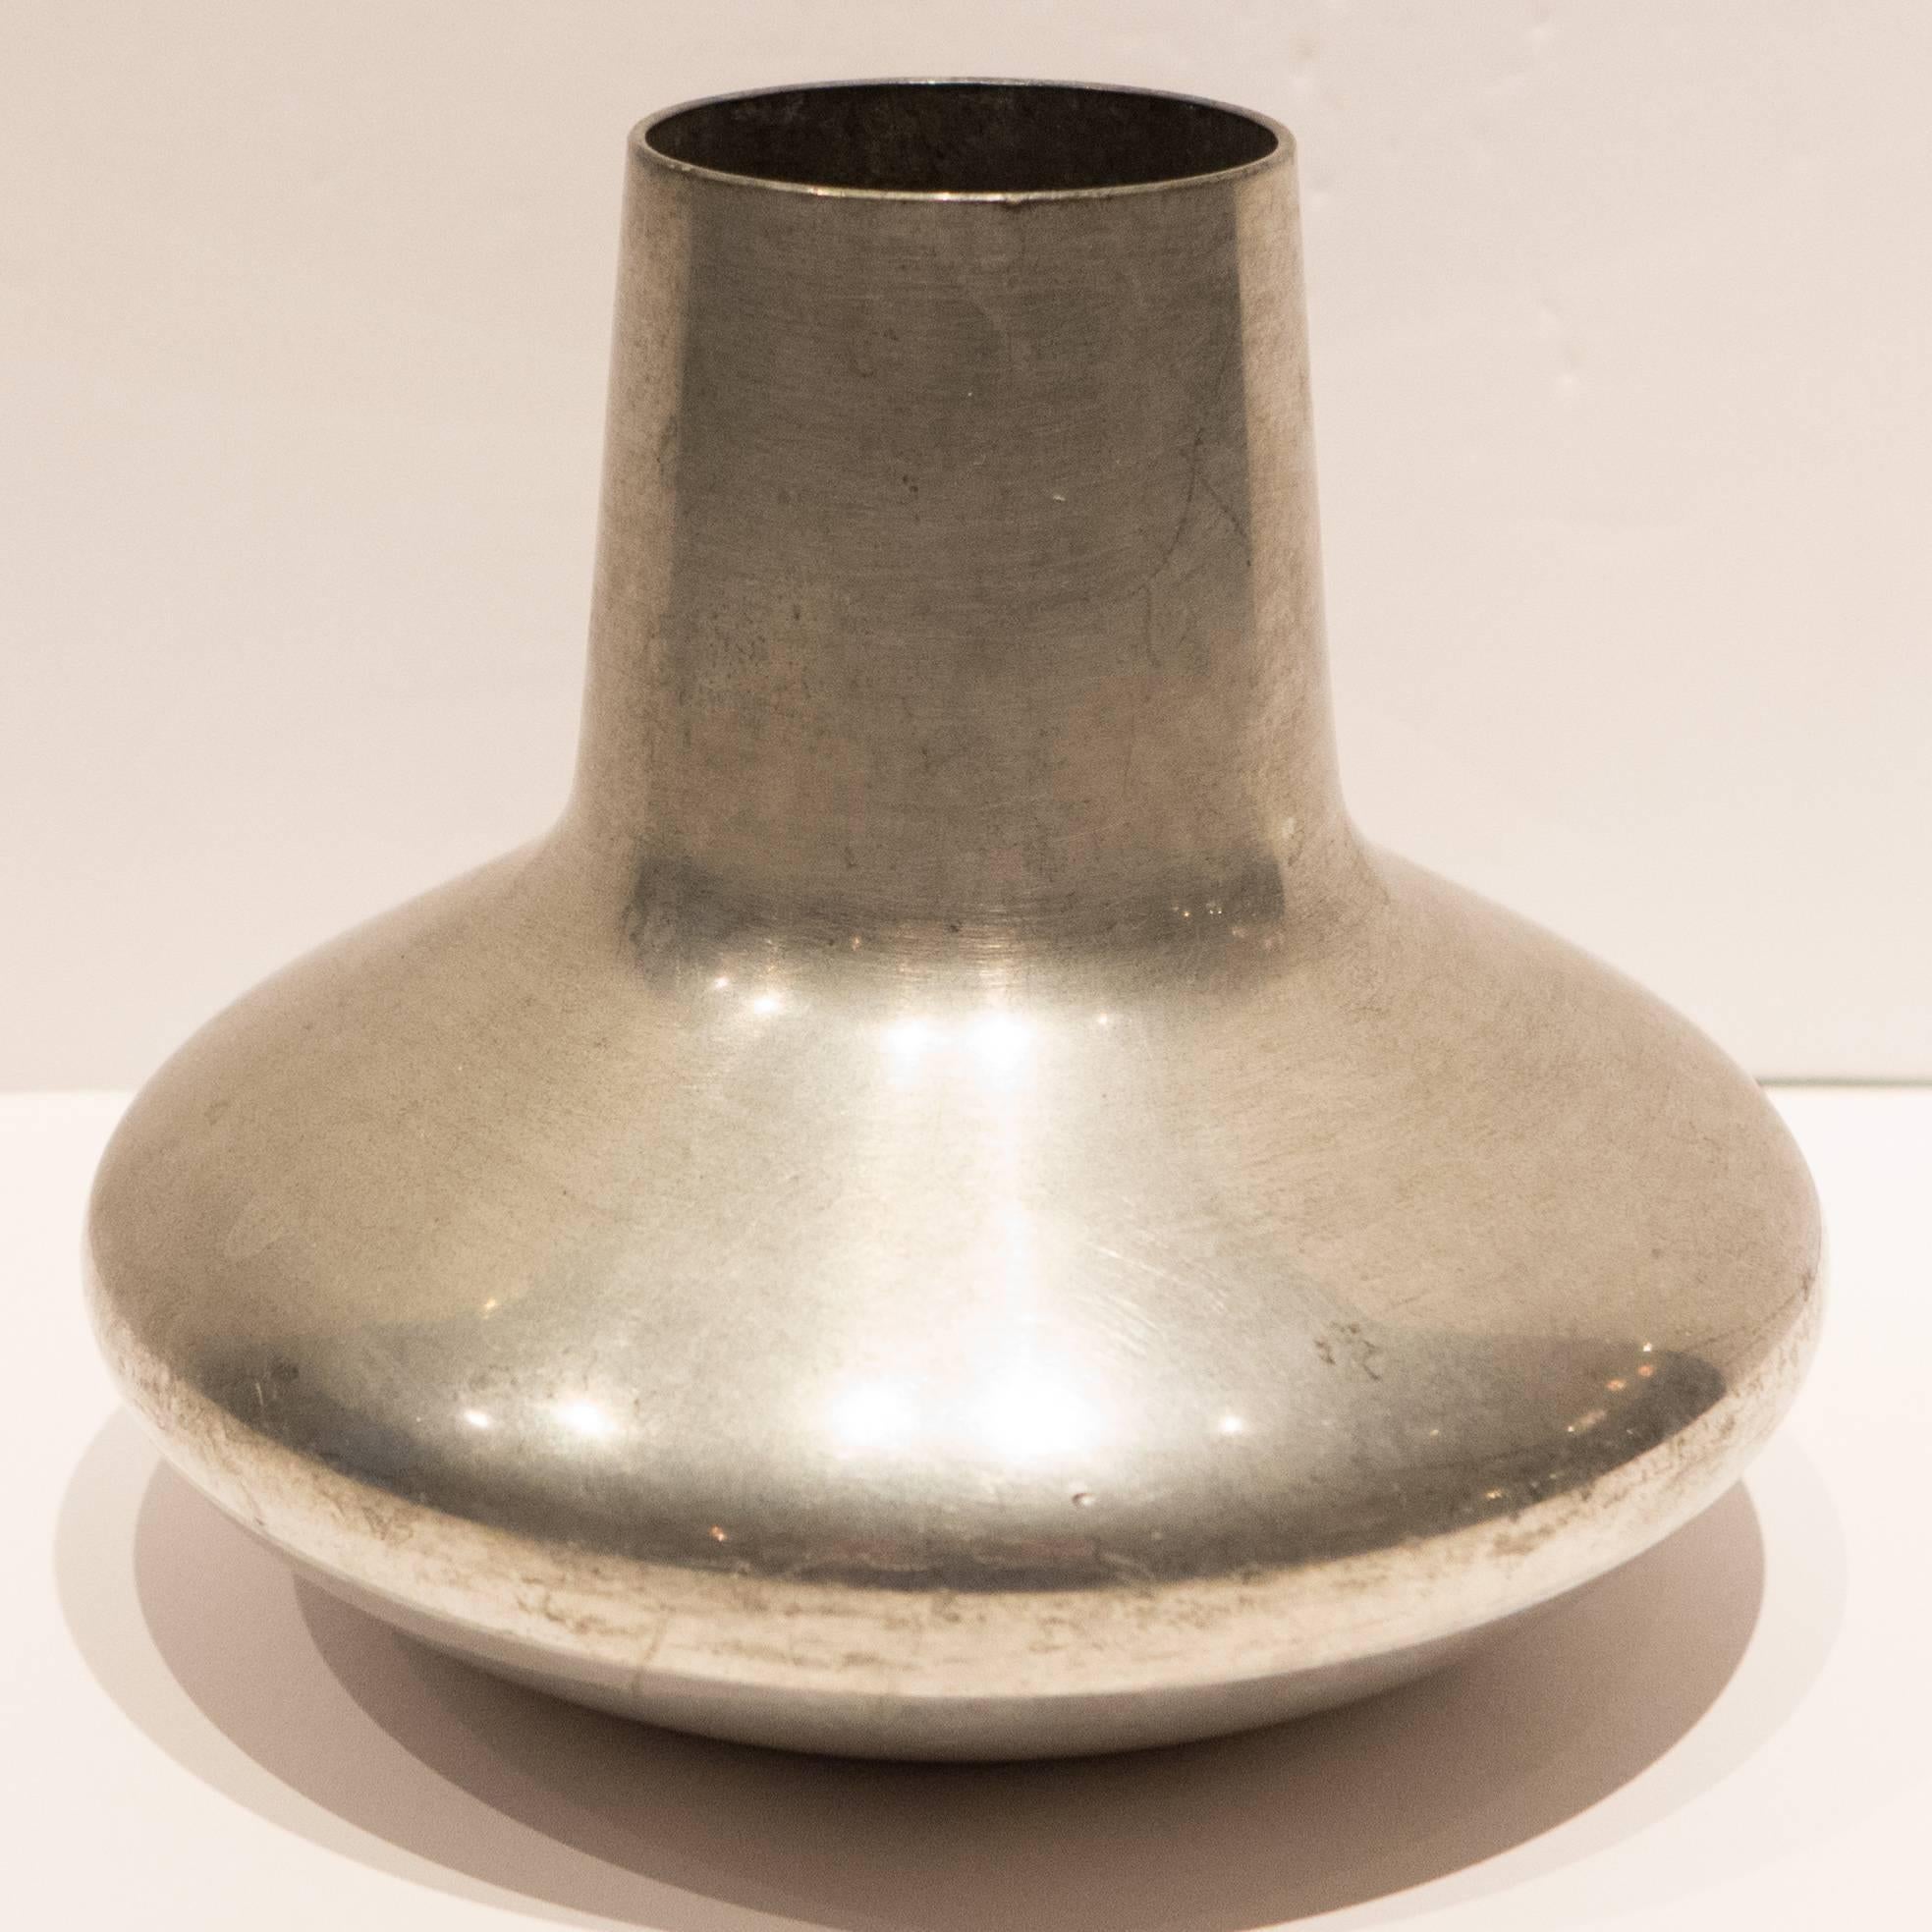 Pewter vase with a sculpturally Minimalist bearing designed by Henning Koppel and produced for Georg Jensen, circa 1950s. Marked 